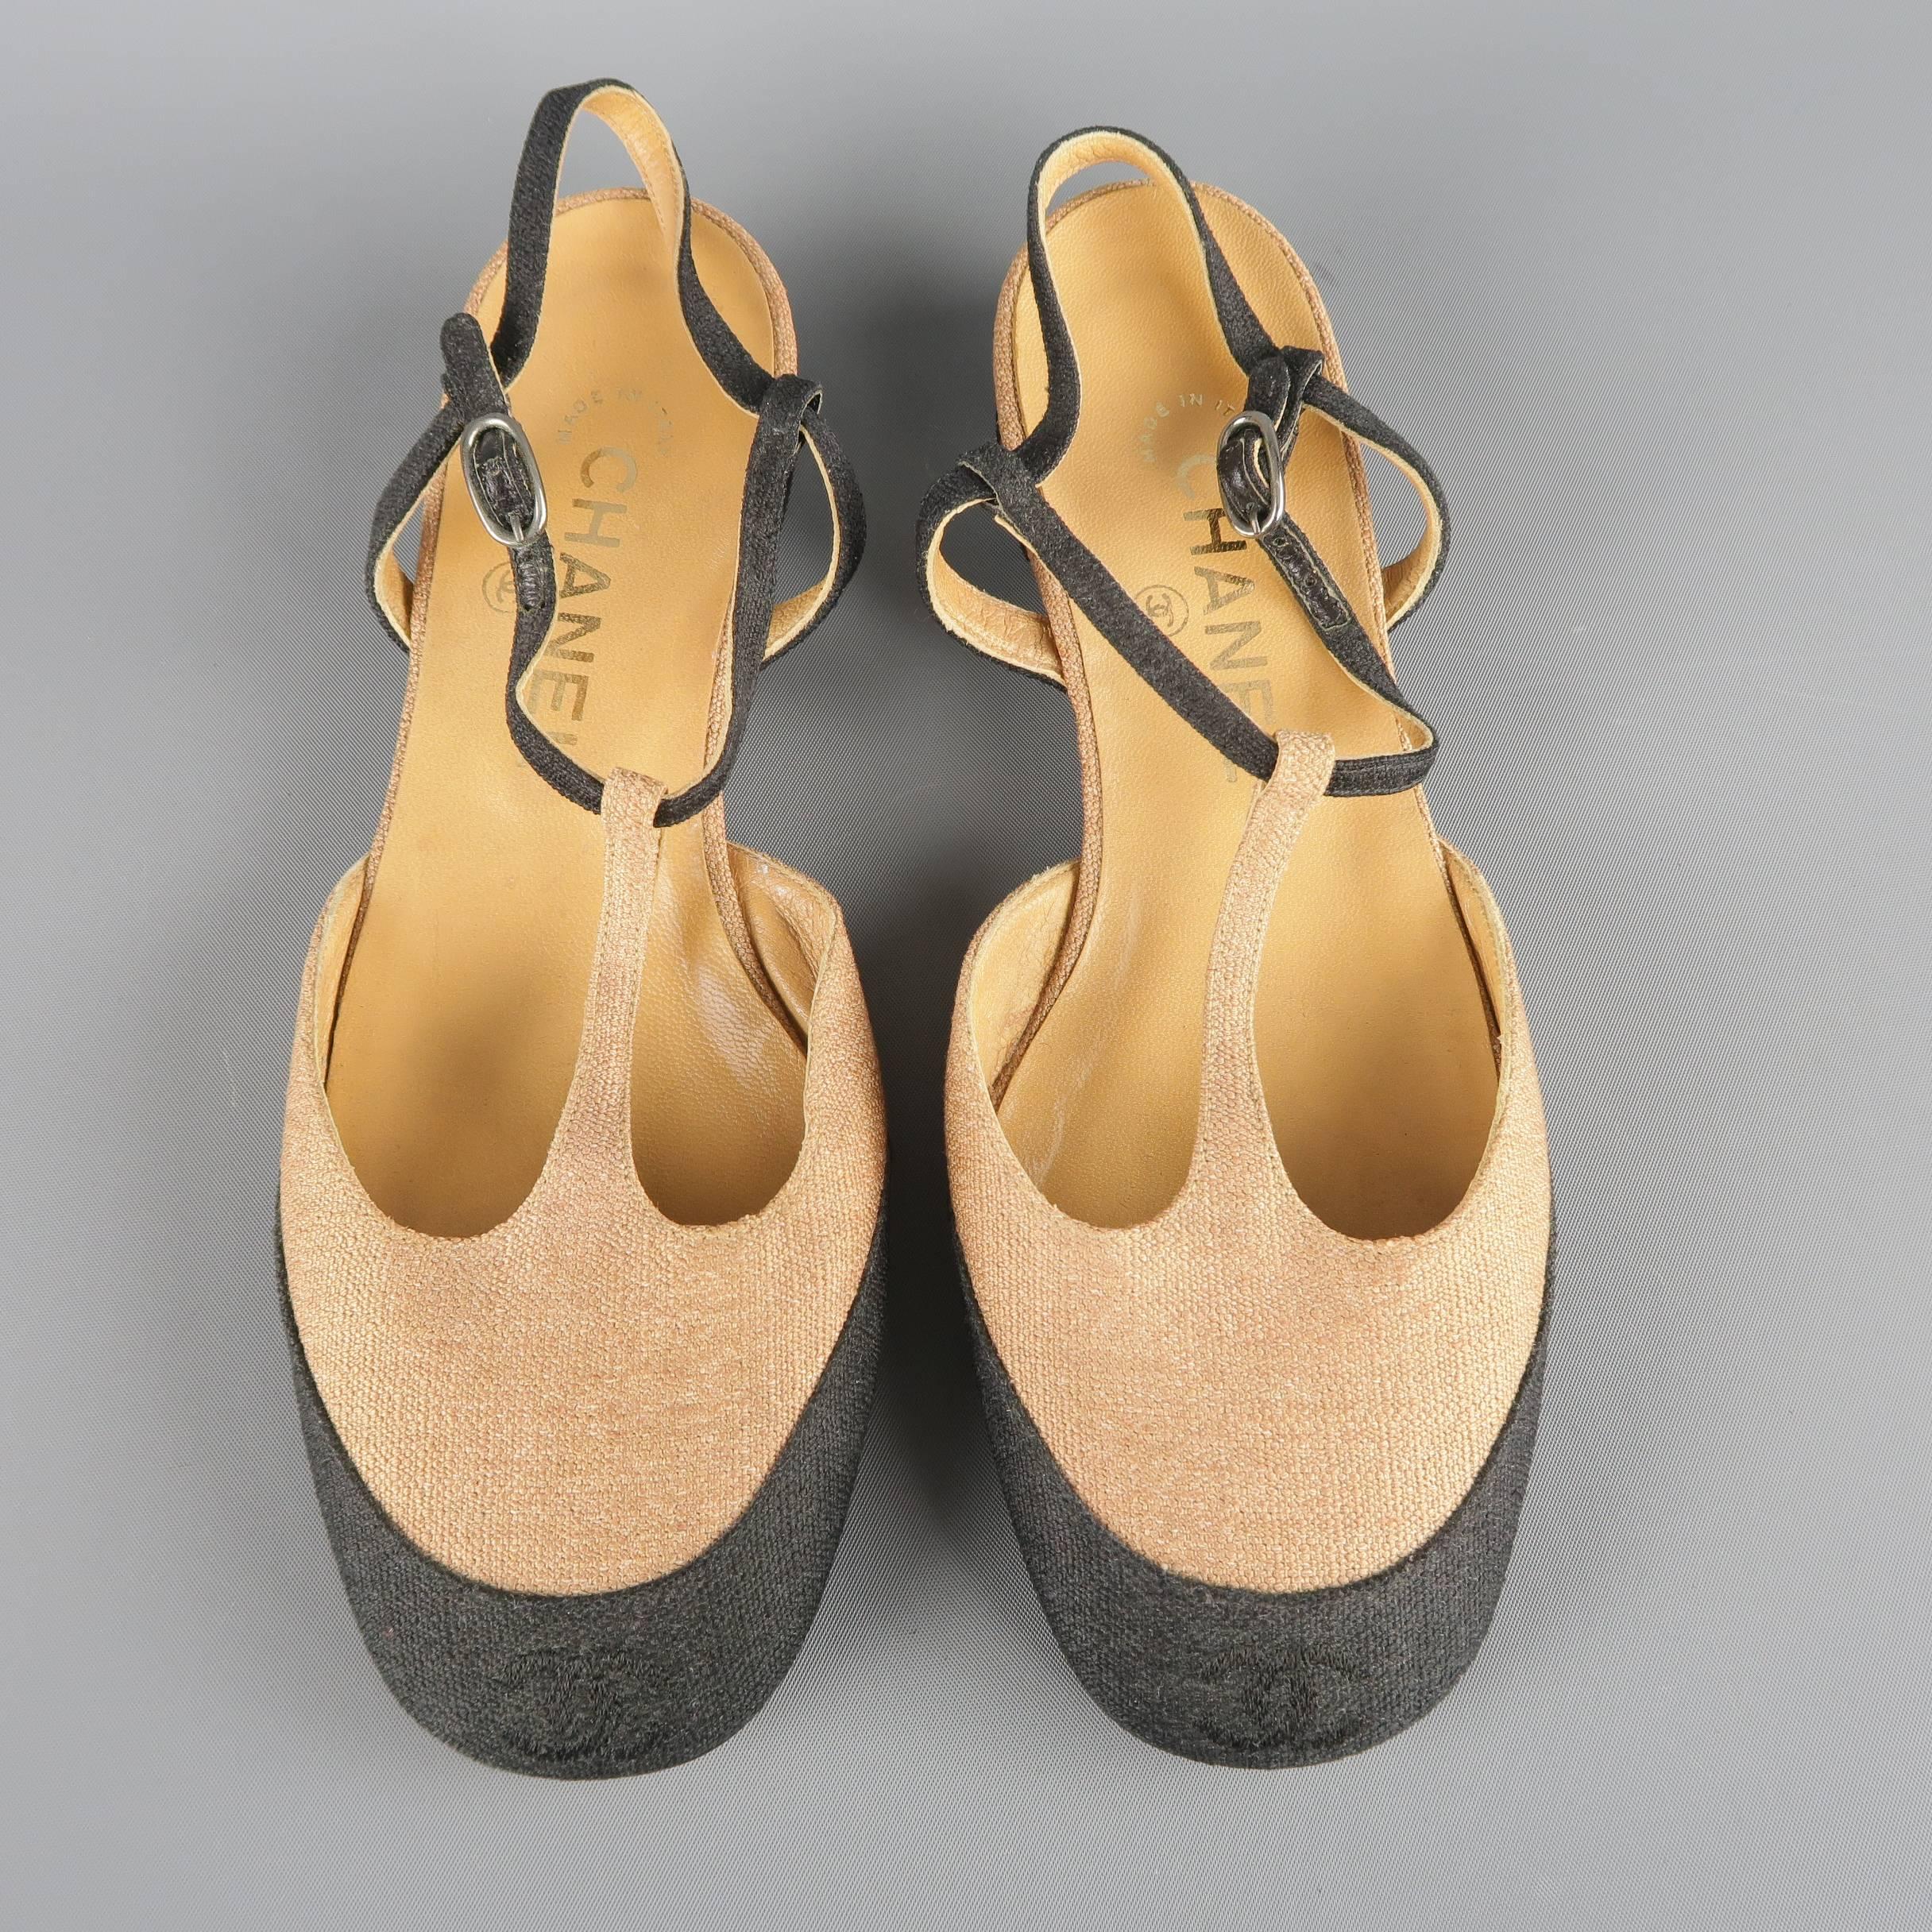 Chanel flats come in tan linen with a rounded square toe, black color block toe cap with CC embroidery, low covered heel, and T strap ankle harness. Made in Italy.
 
Excellent Pre-Owned Condition.
Marked: IT 37
